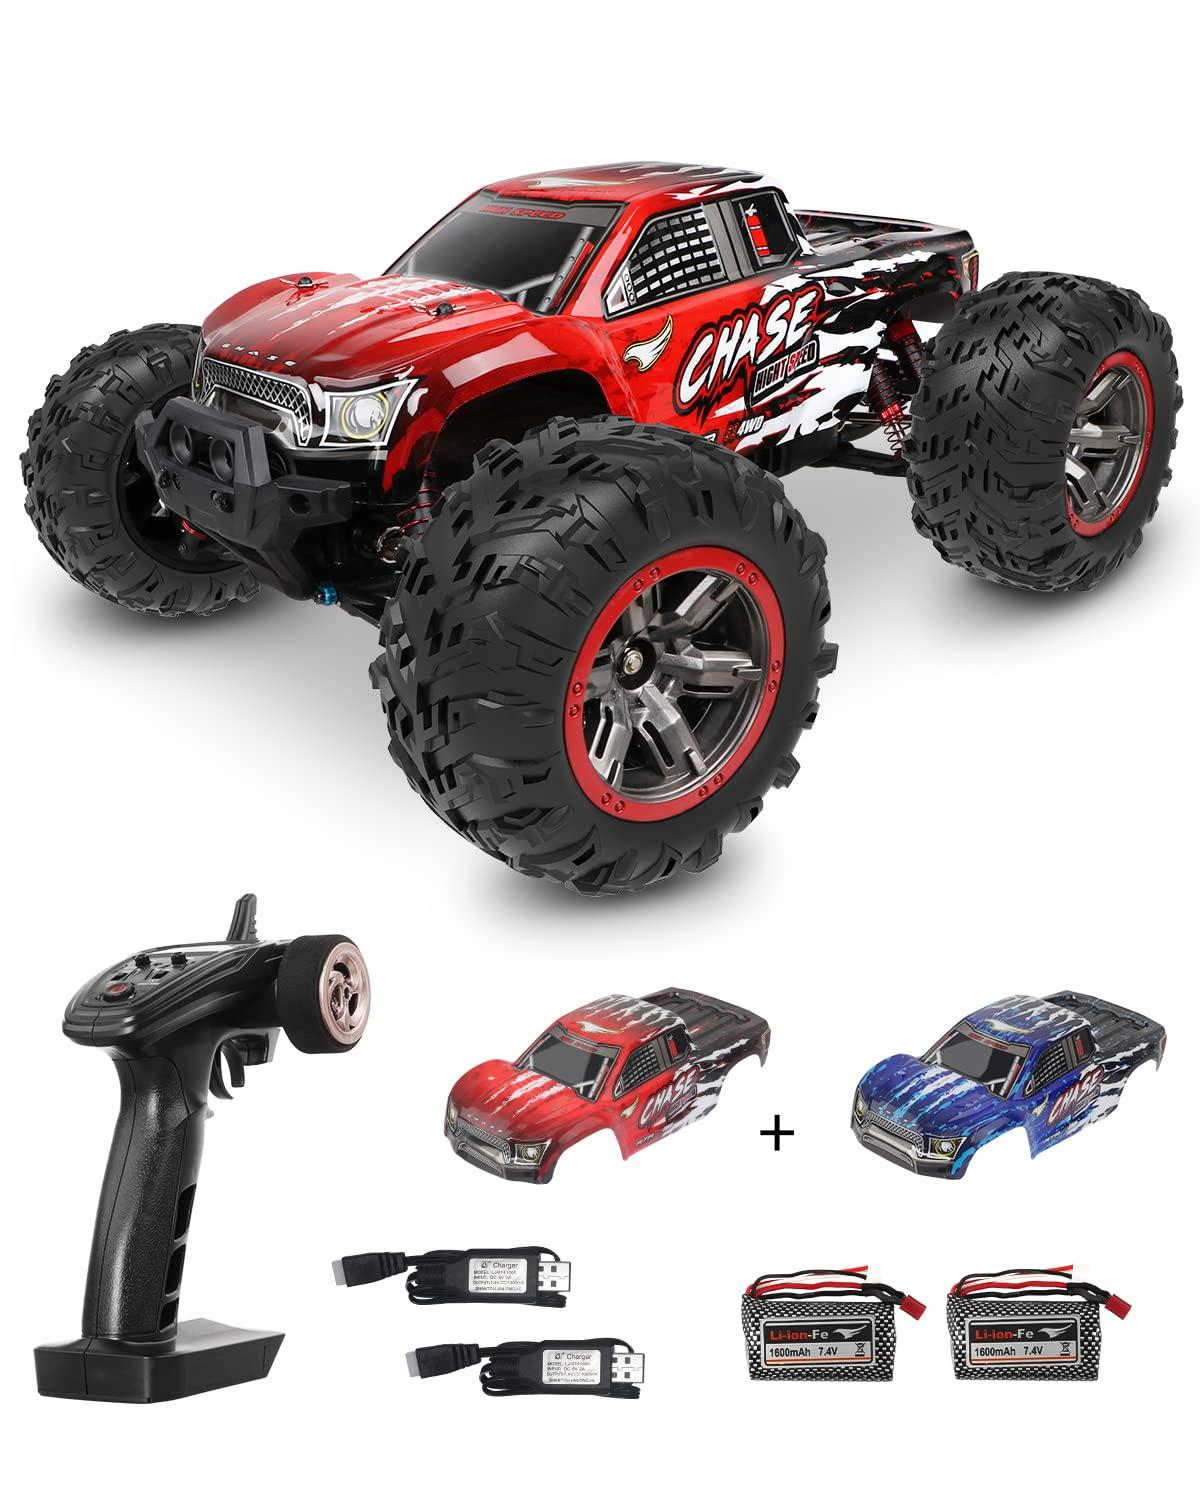 Rc Monster Truck 4X4: High-Quality Construction 